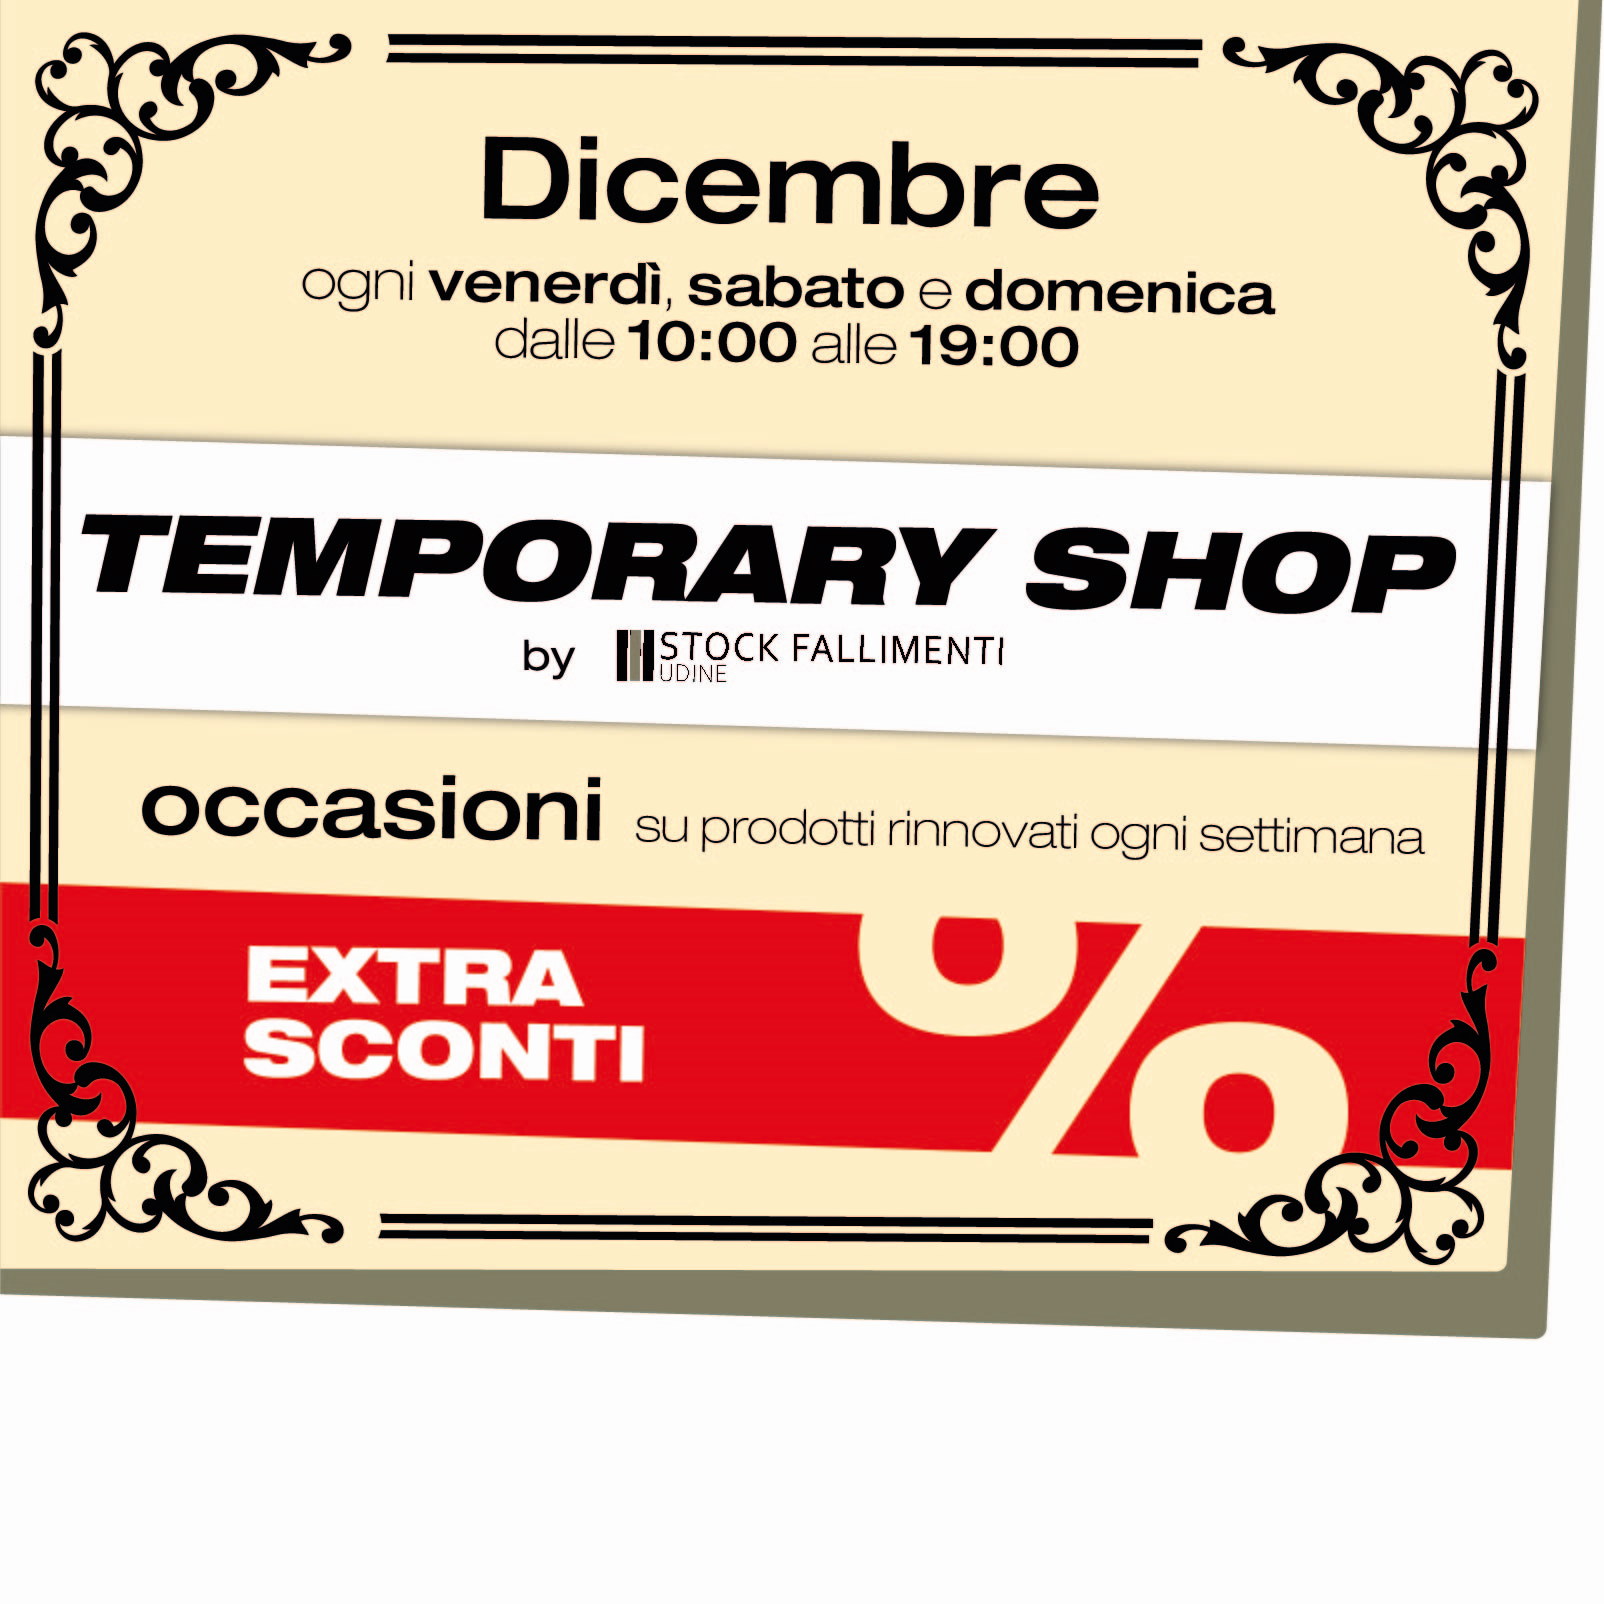 Temporary Shop by Stock Fallimenti Udine